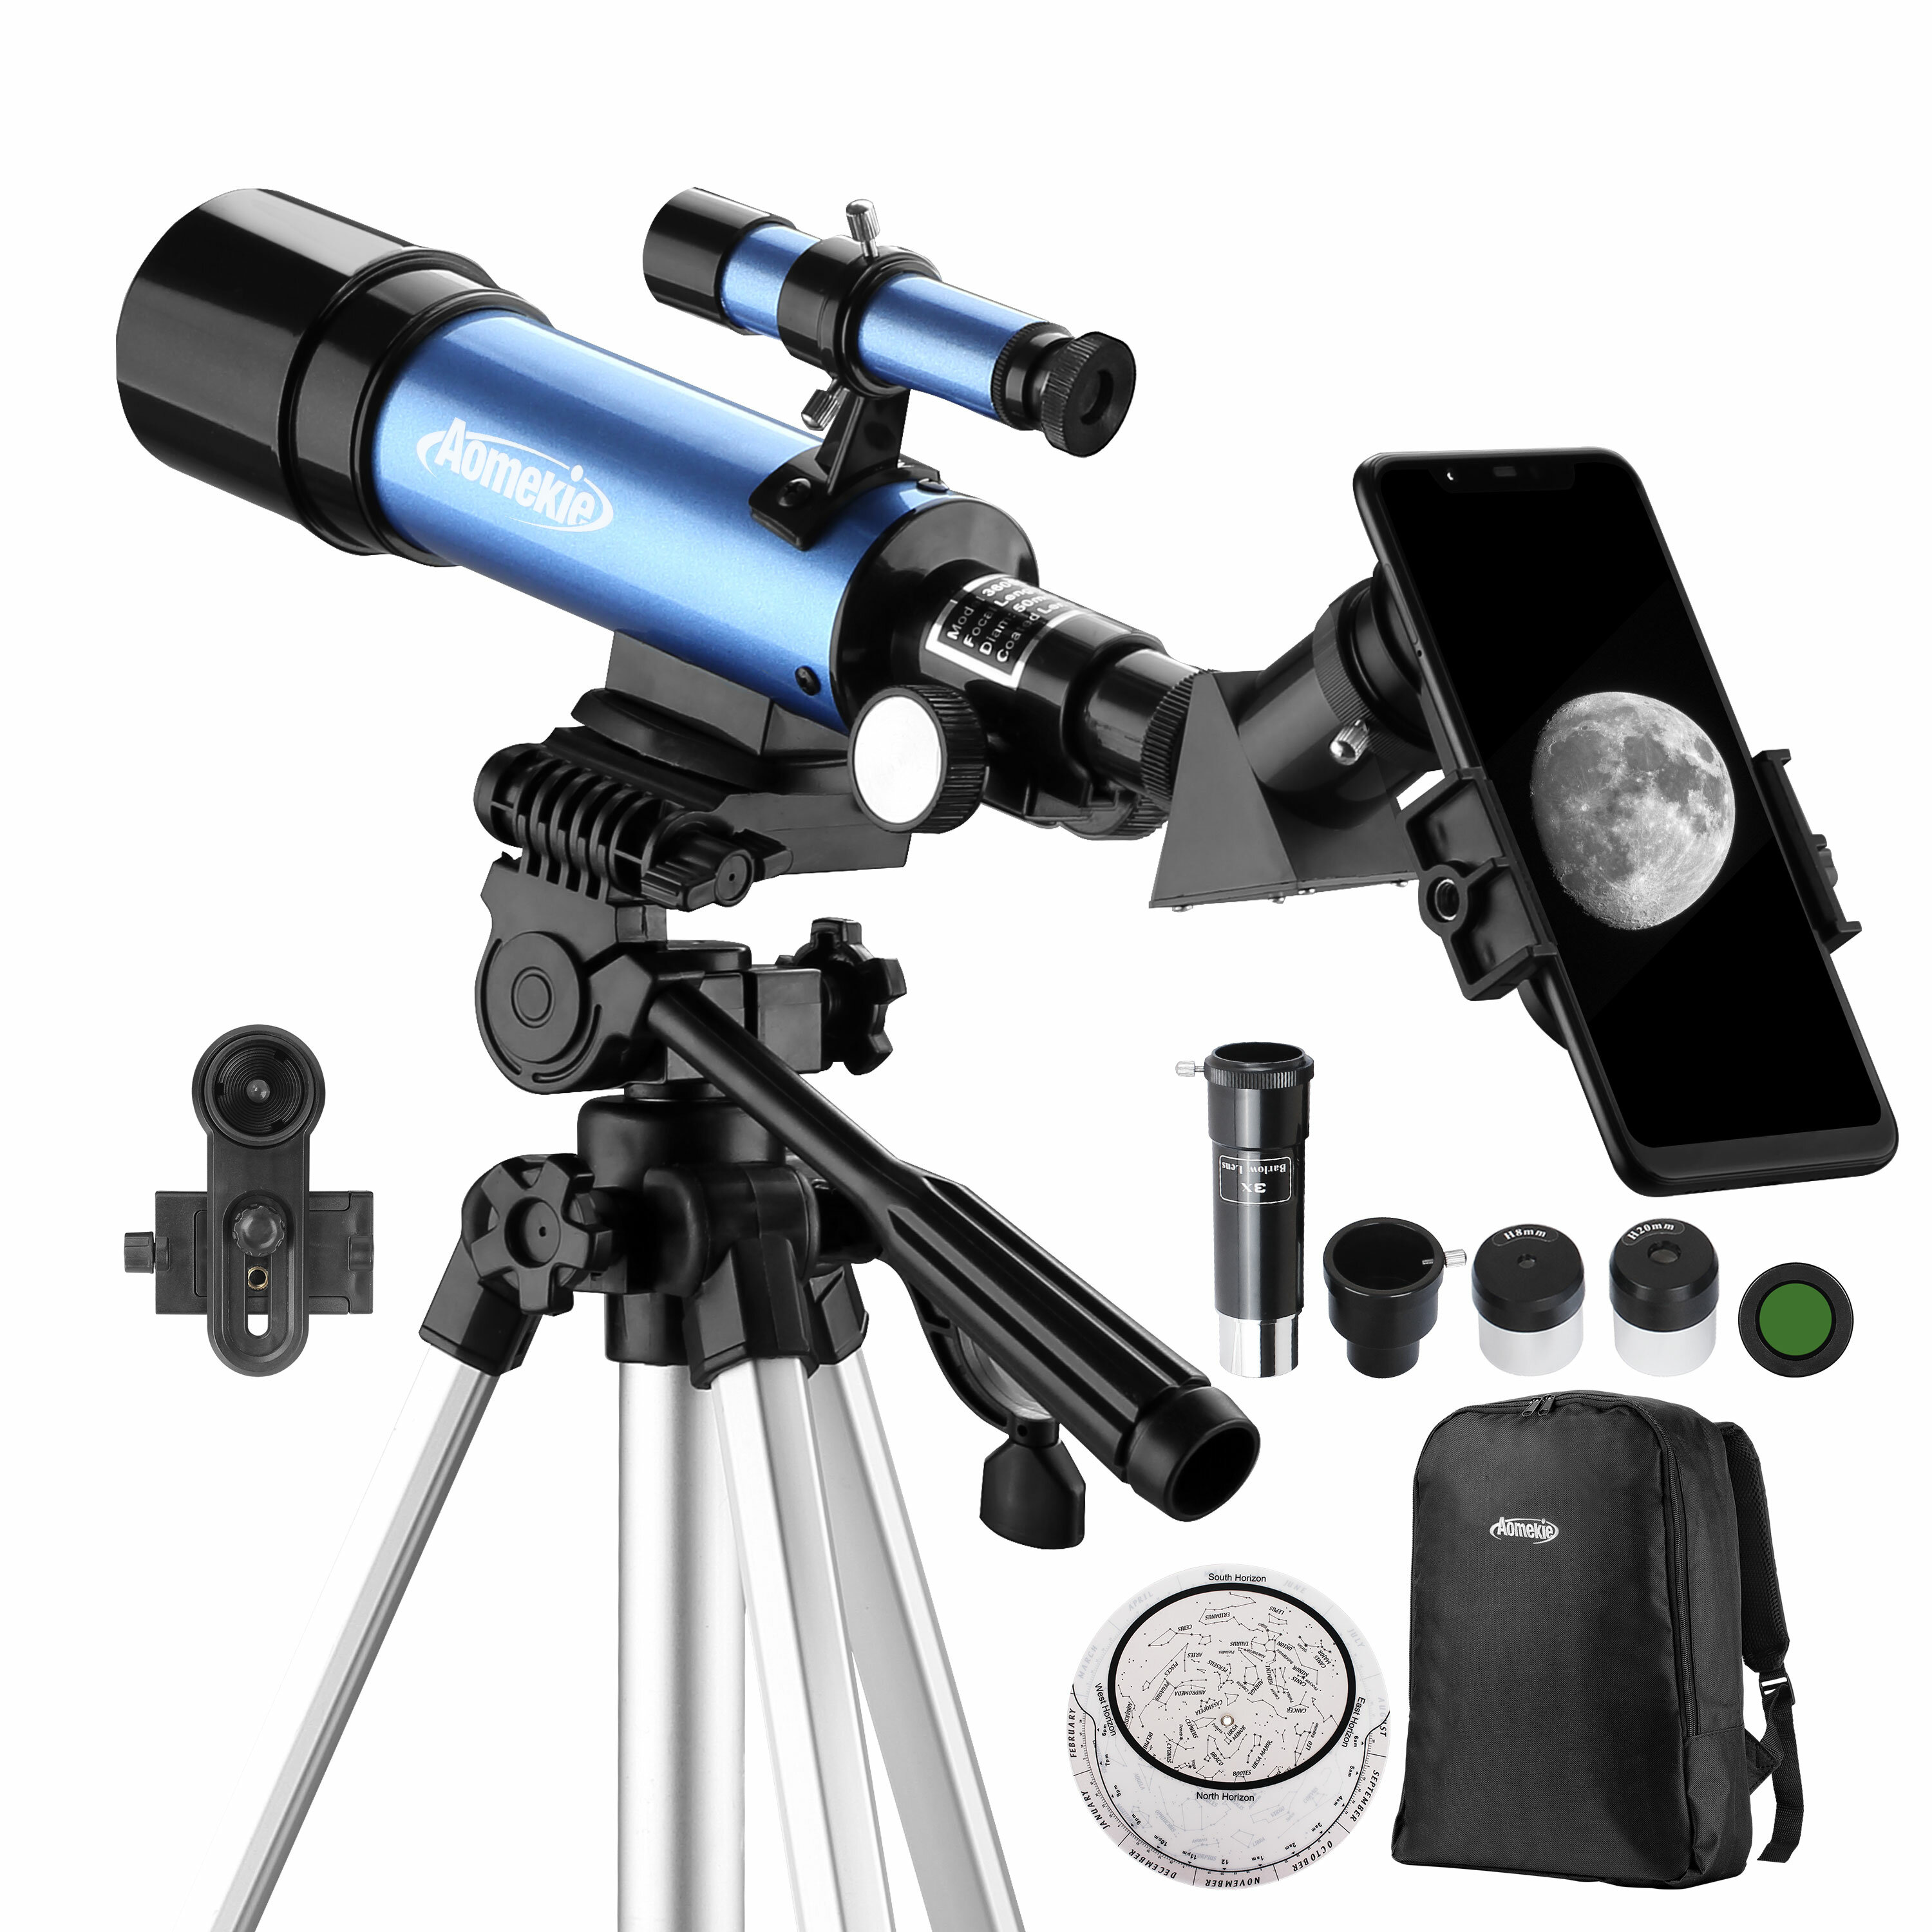 

AOMEKIE 18X-135X Astronomical Telescope 50mm Aperture Refractor Telescopes with Phone Adapter & Adjustable Tripod for As